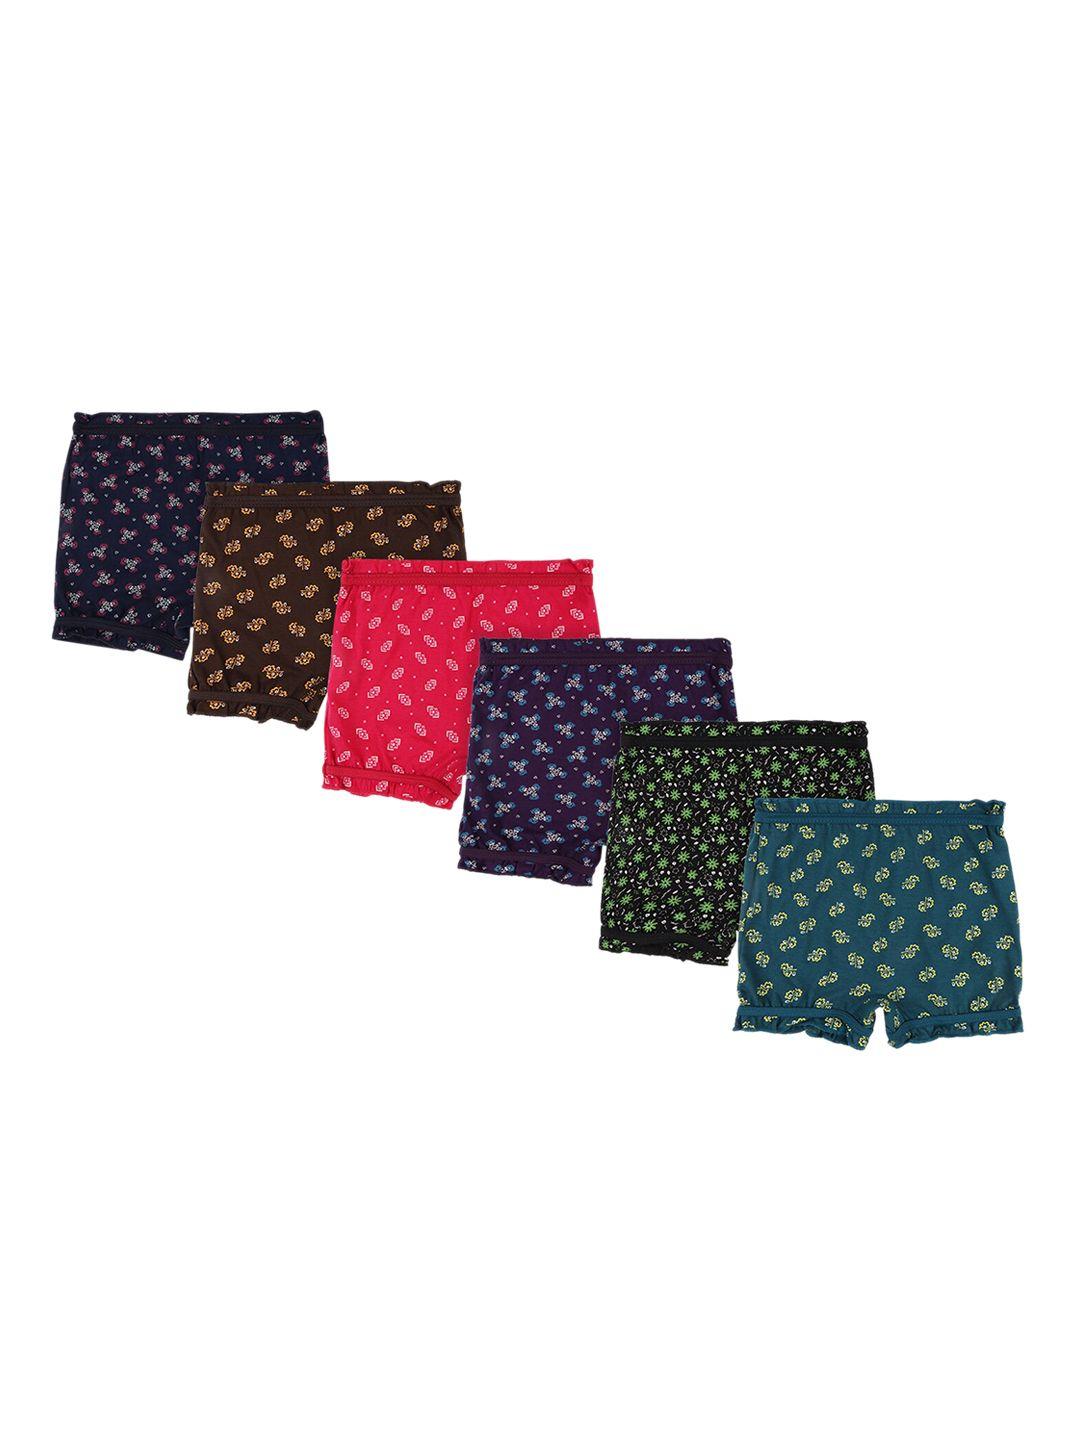 bodycare unisex kids pack of 6 assorted printed cotton basic briefs